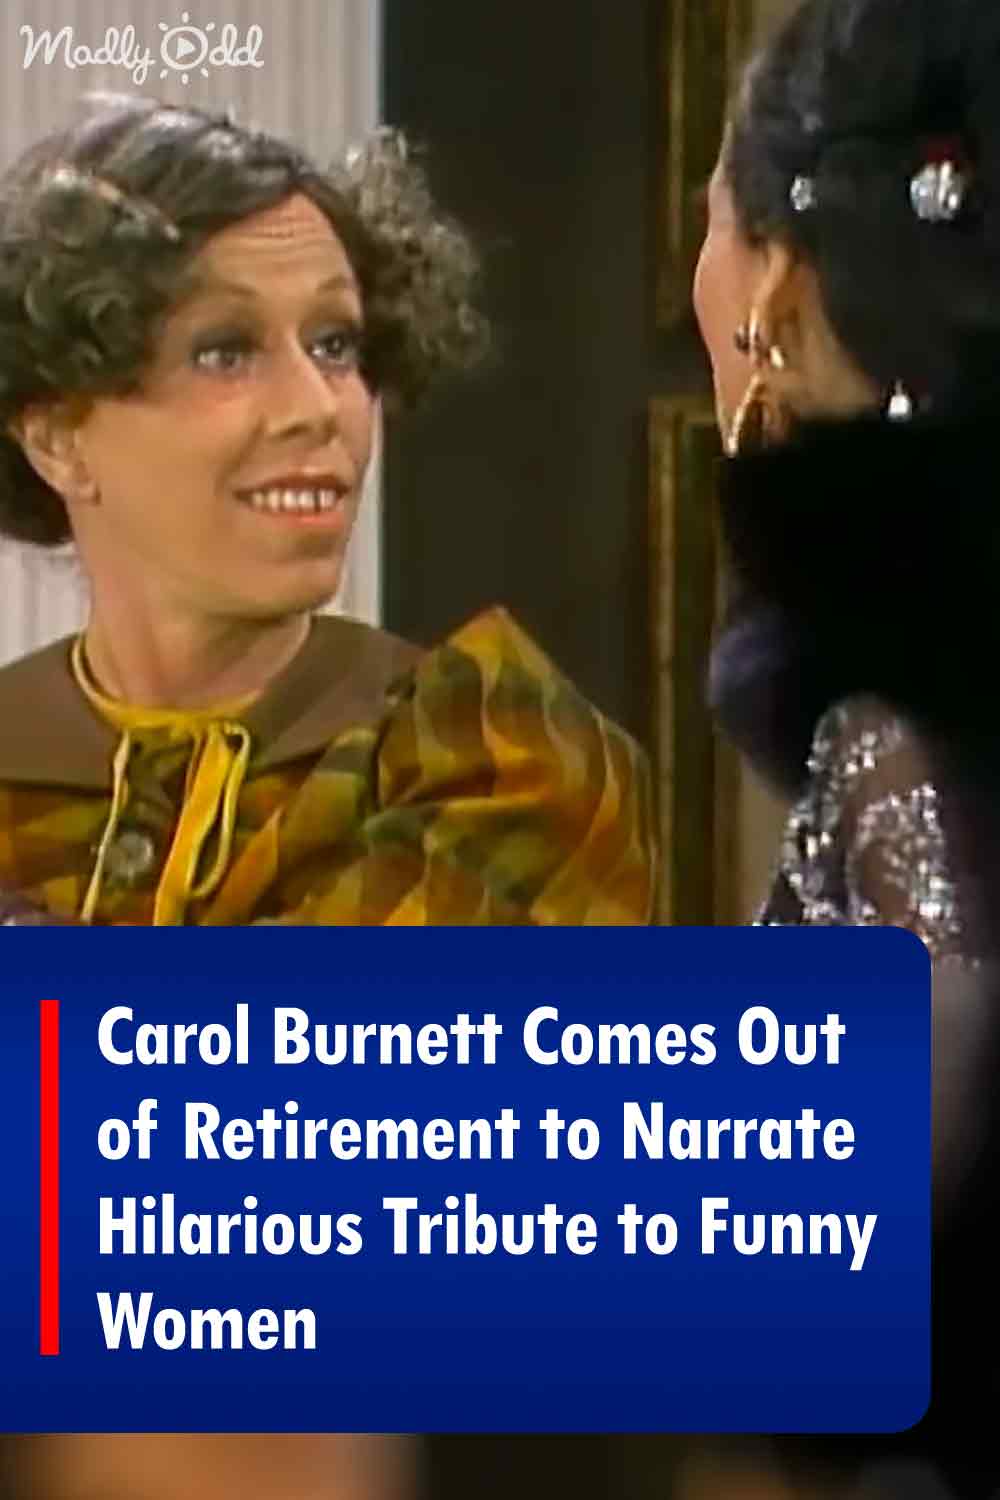 Carol Burnett Comes Out of Retirement to Narrate Hilarious Tribute to Funny Women